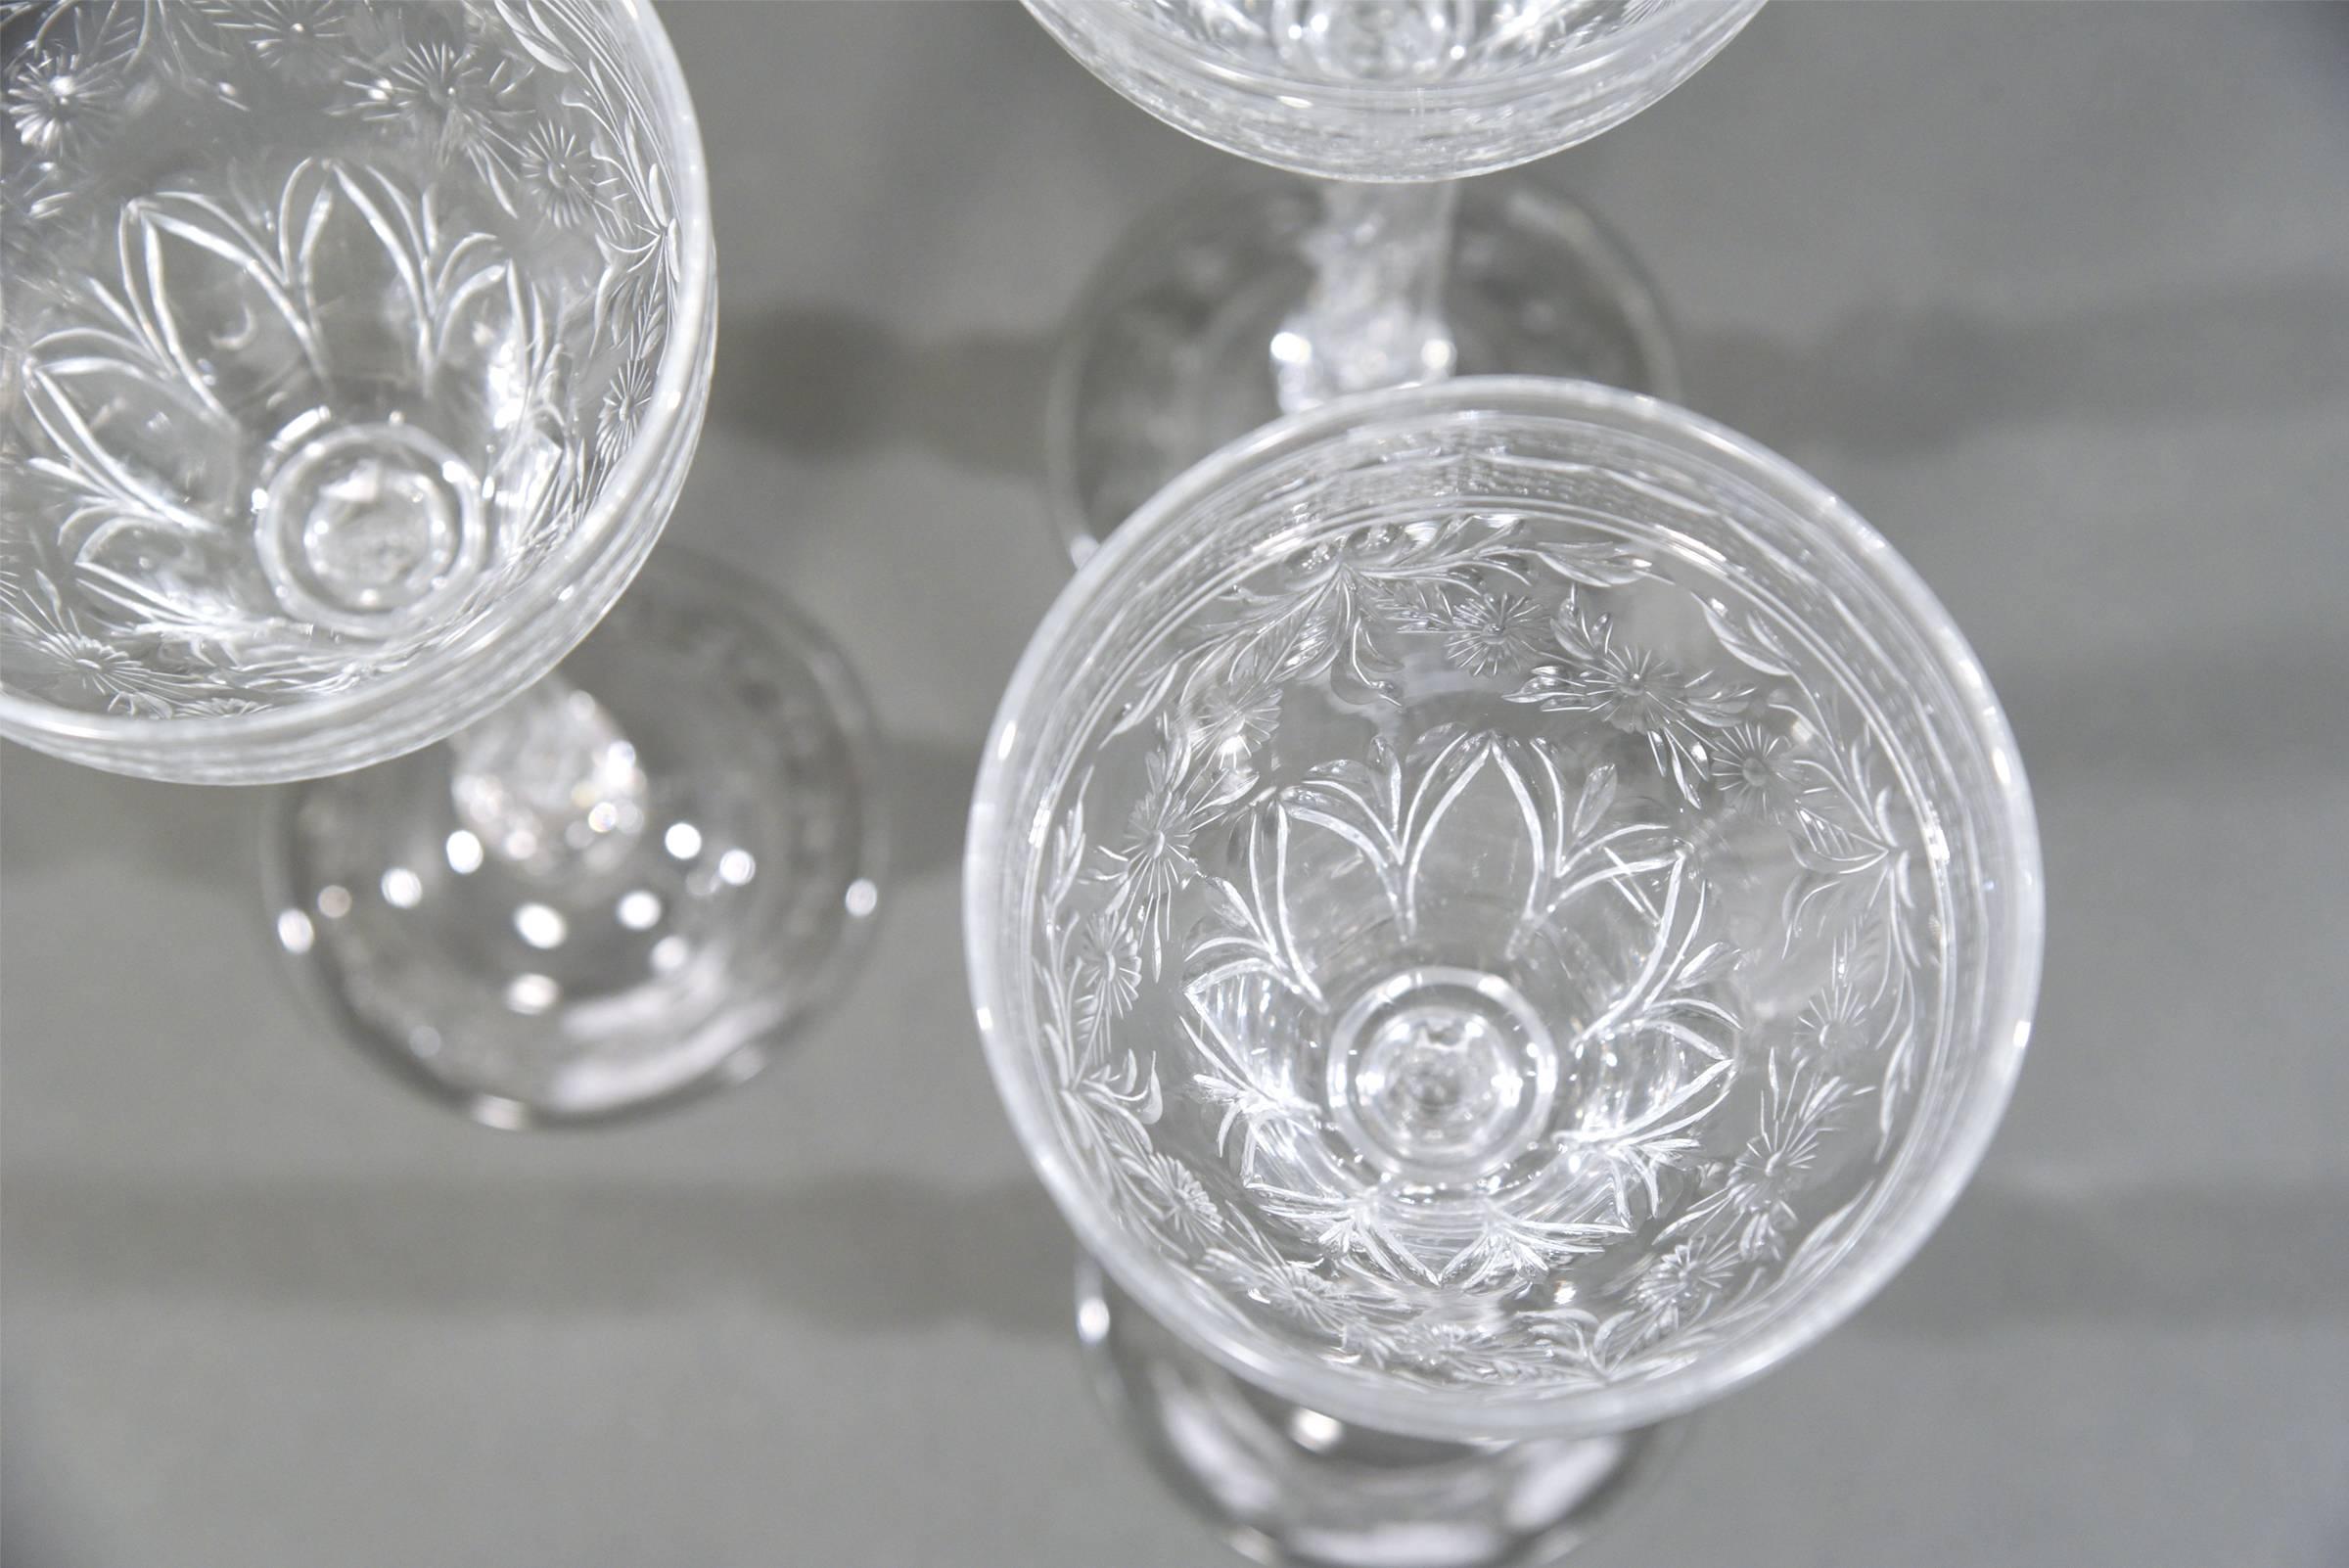 Early 20th Century Set of 12 Webb Tall Handblown Crystal Goblets with Wheel Cutting and Spiral Stem